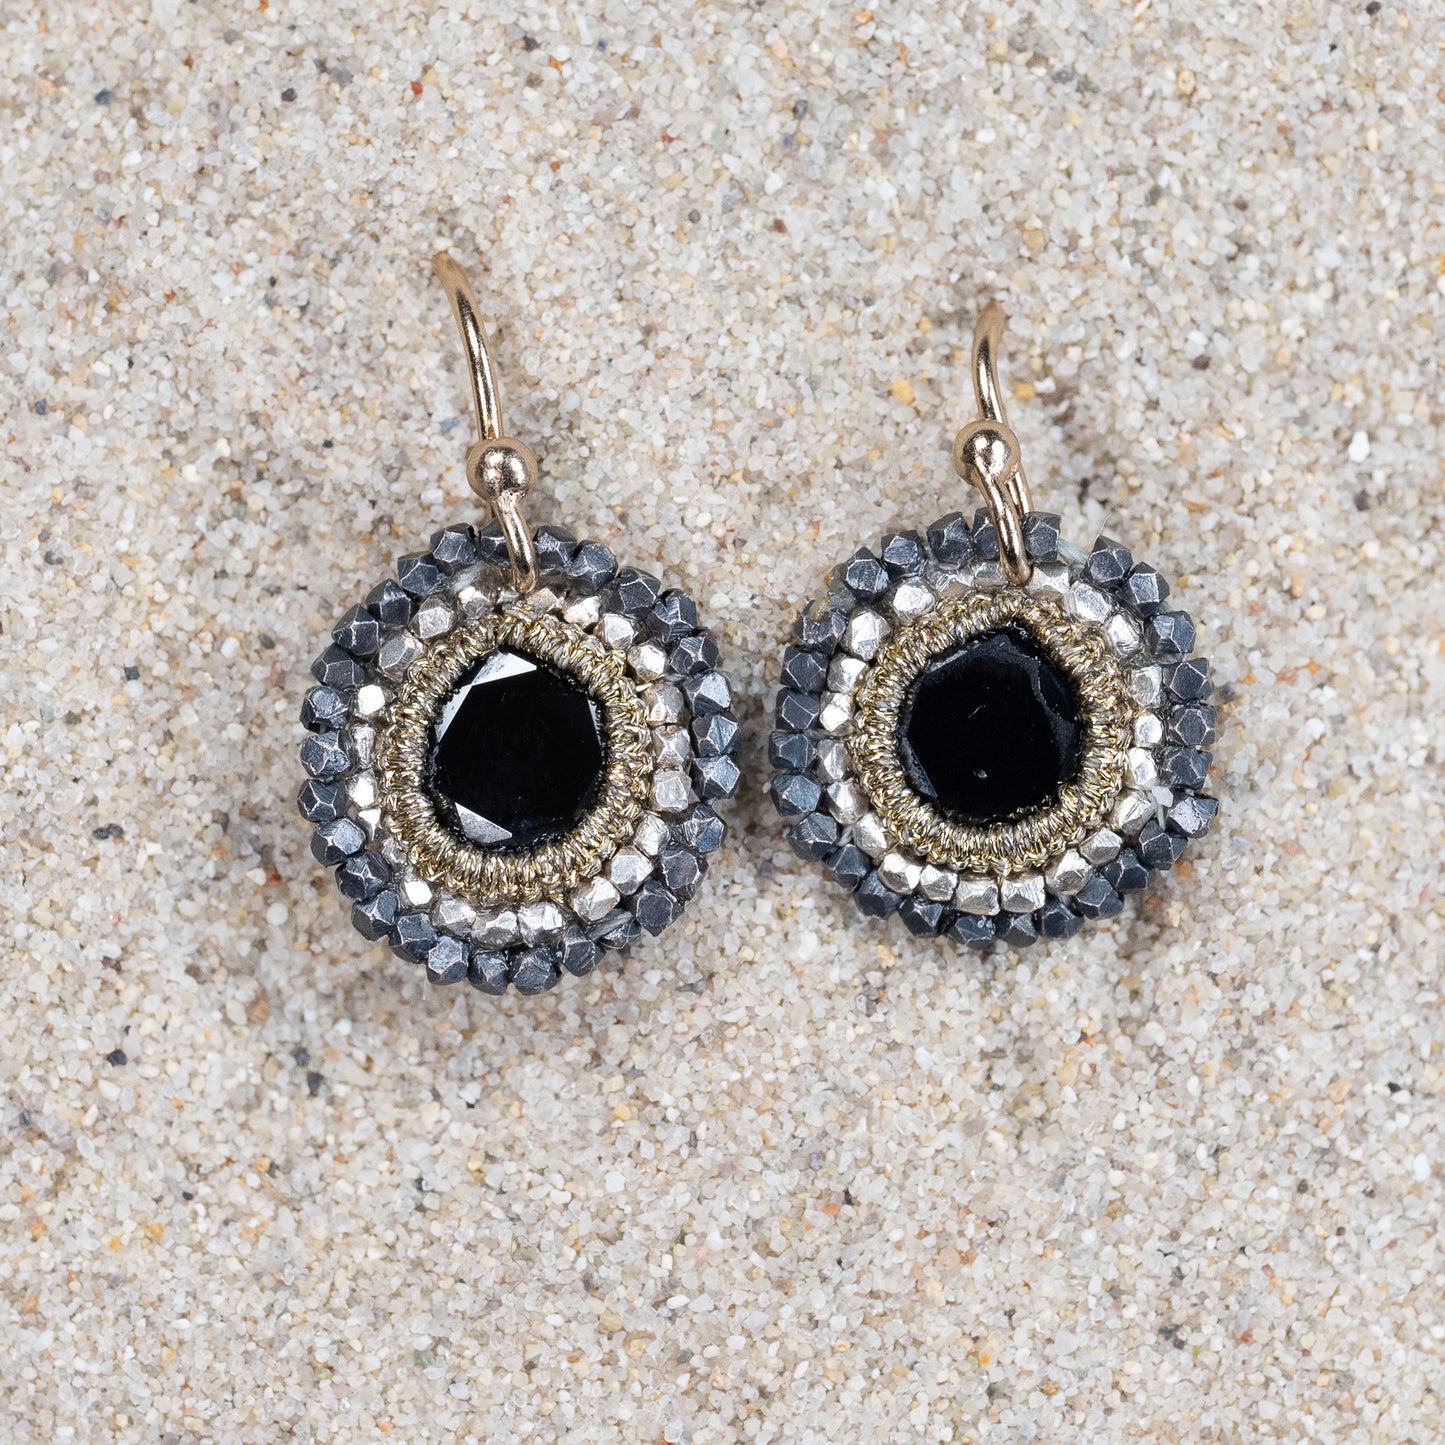 Danielle Welmond Caged Spinel Earrings with Pyrite Orbit